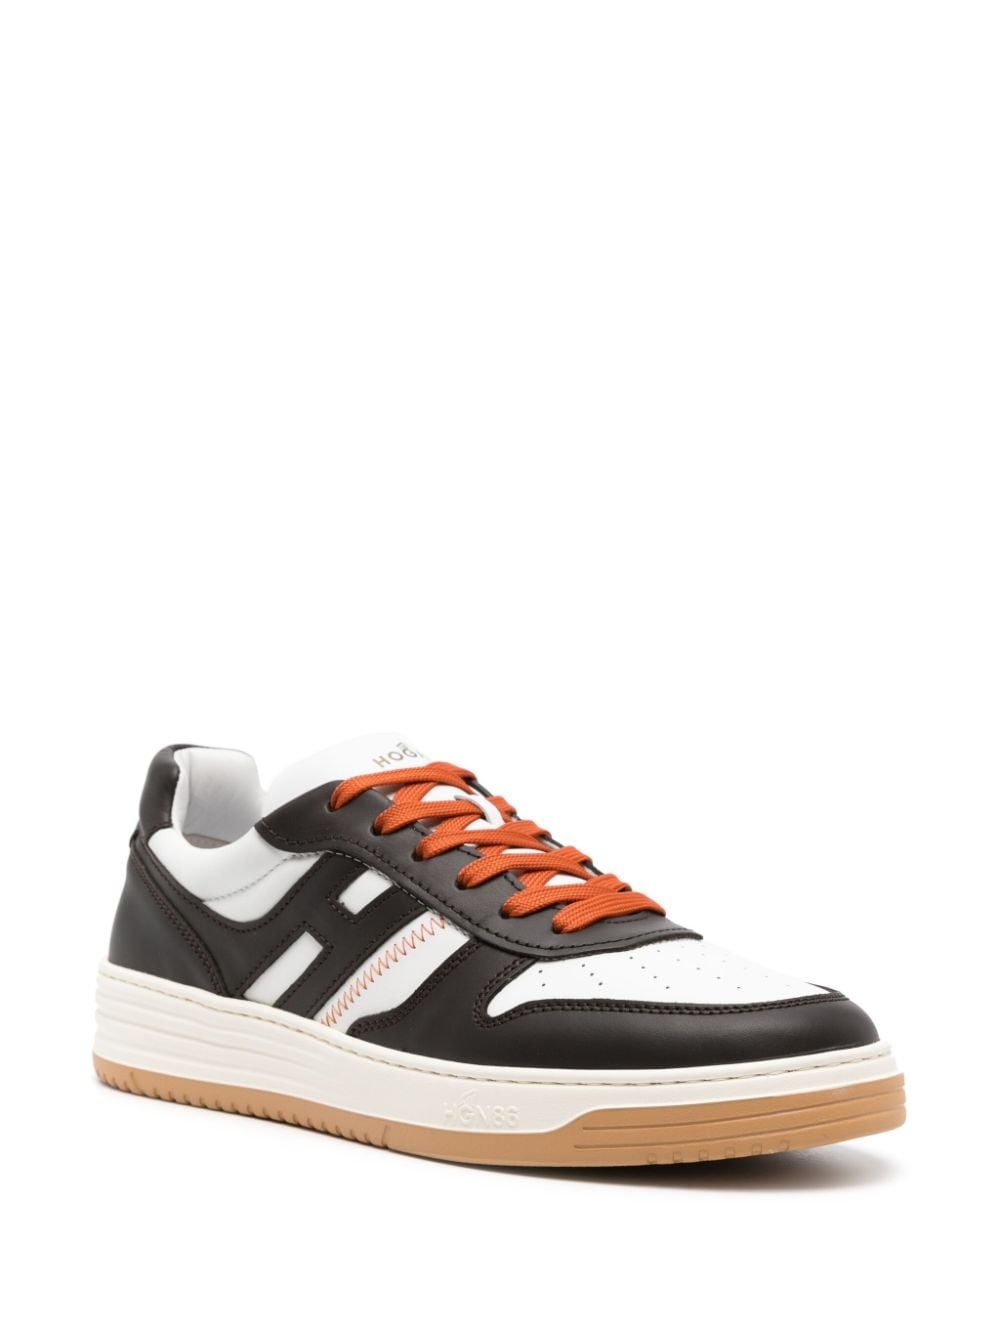 H630 leather sneakers - 2